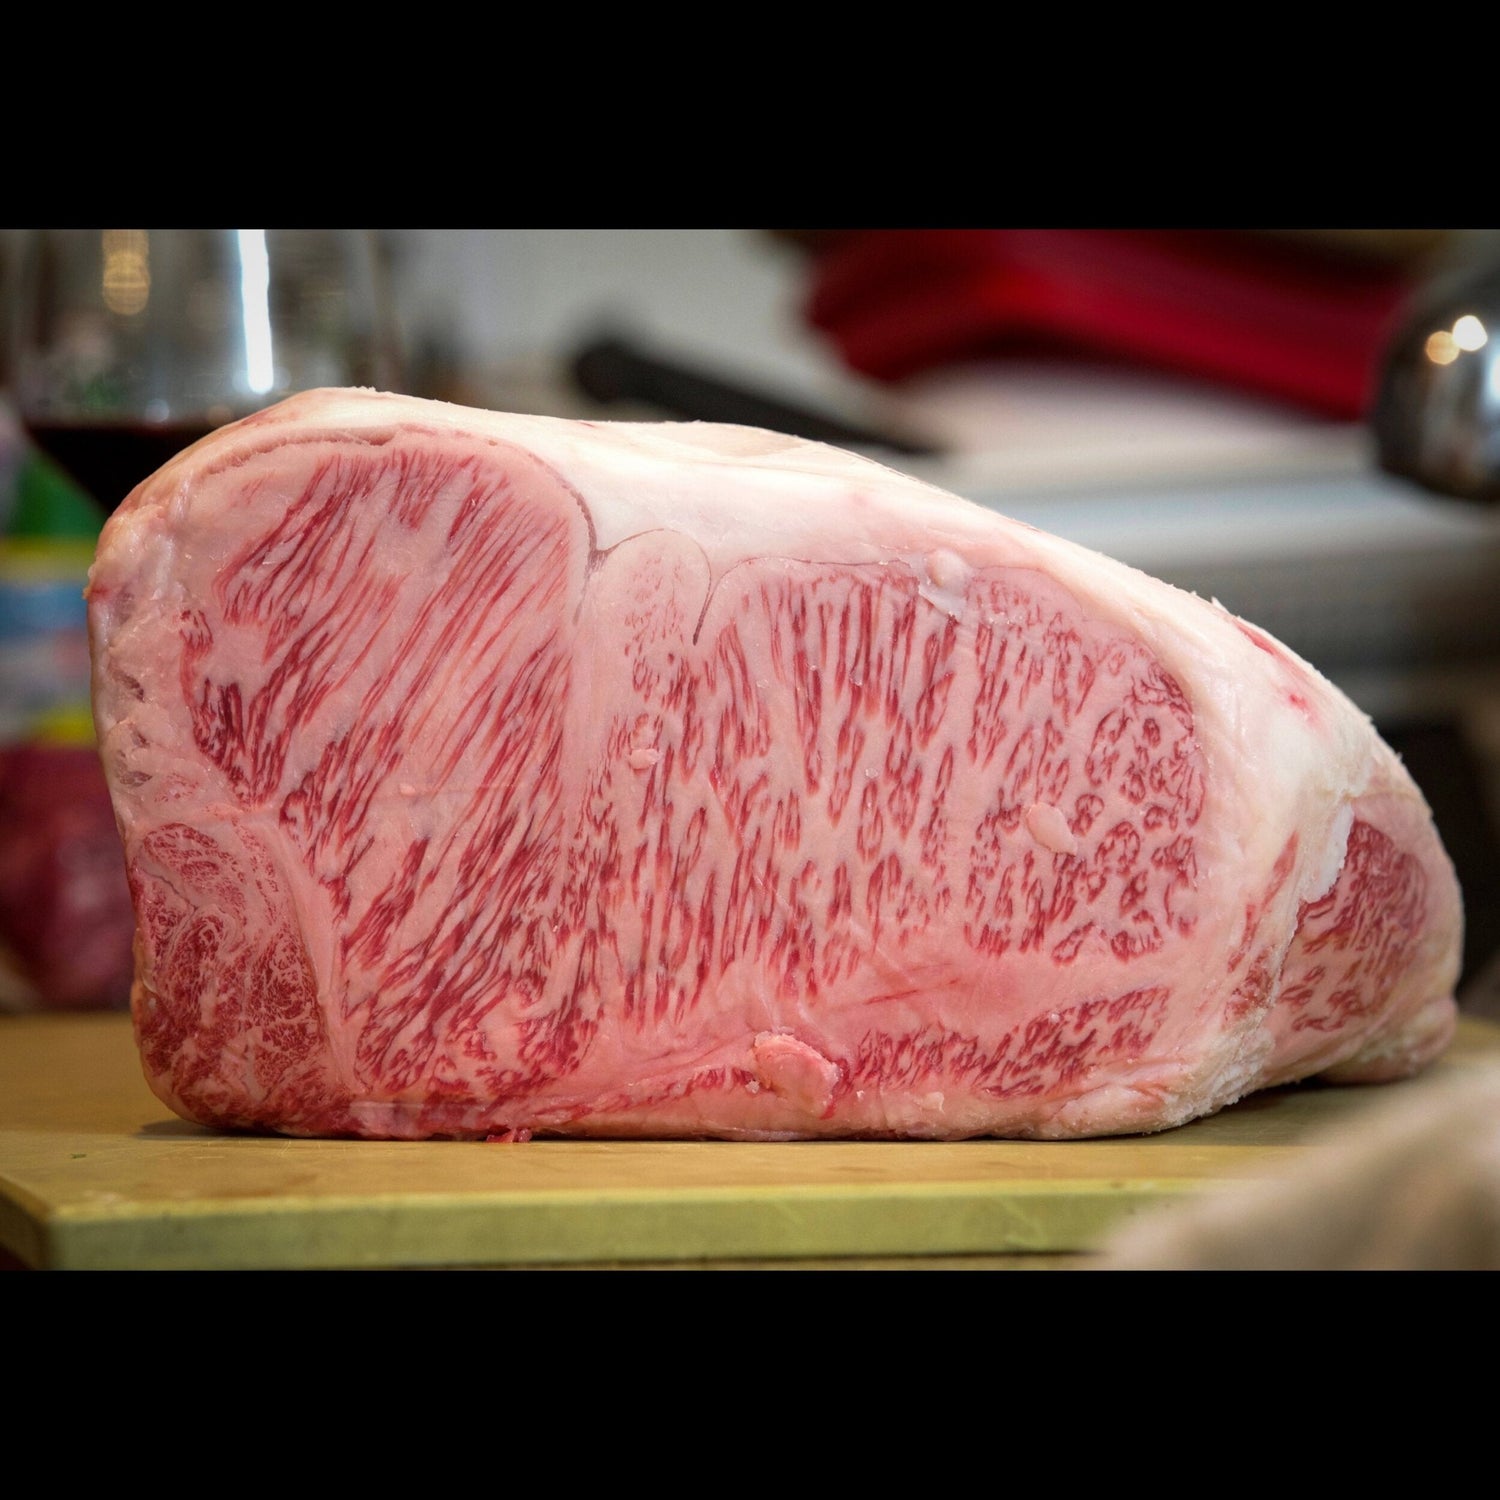 Premium wagyu beef delivered to your home!